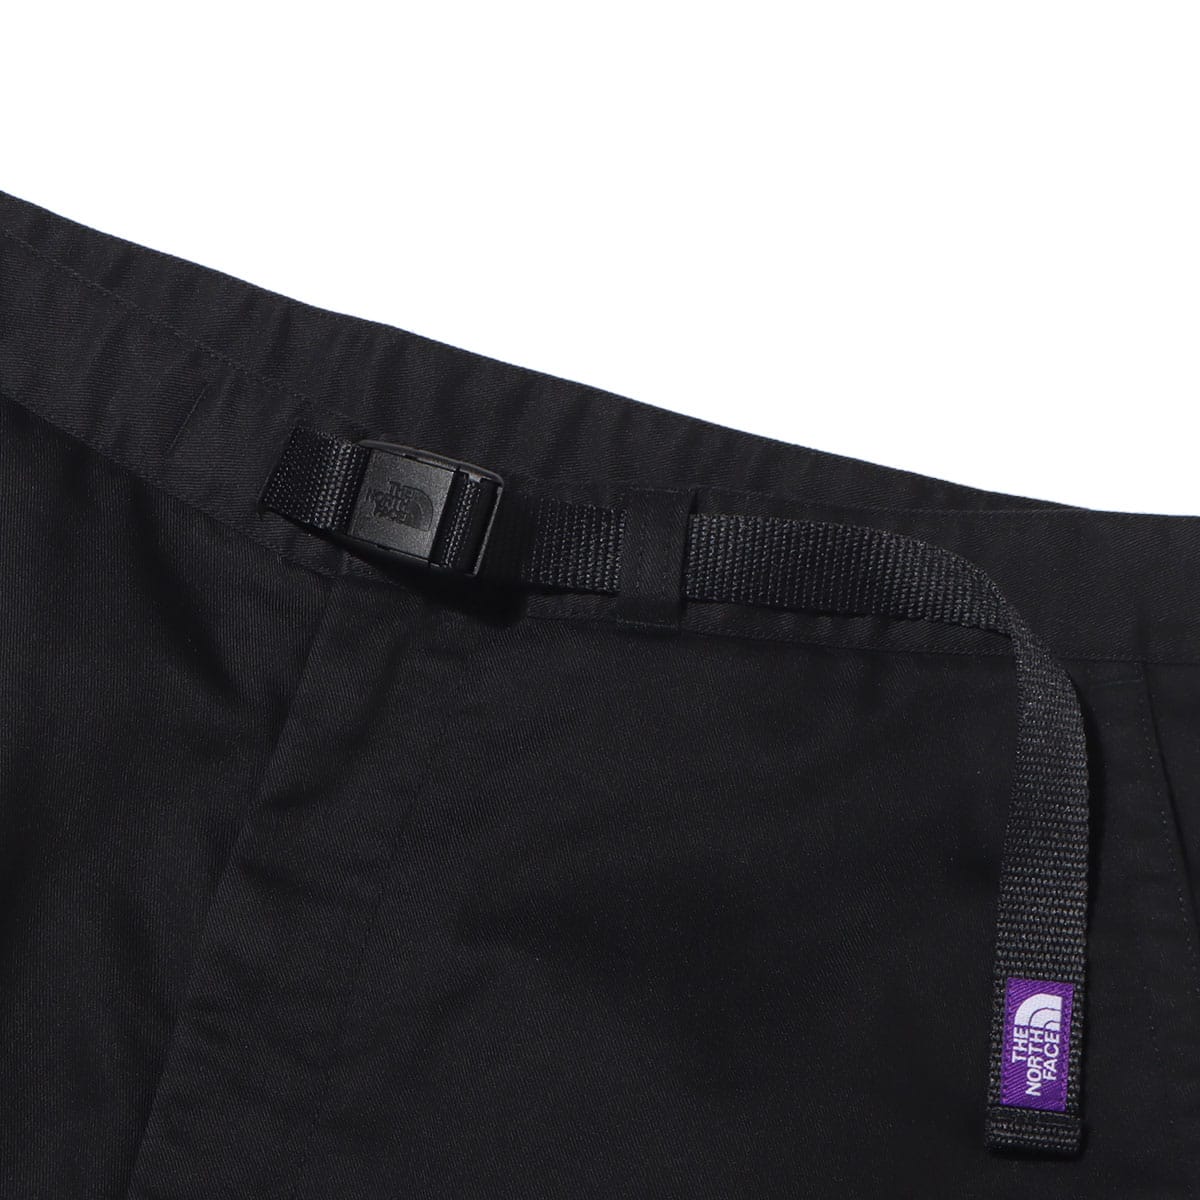 THE NORTH FACE PURPLE LABEL Stretch Twill Cargo Shorts Black 23SS-I